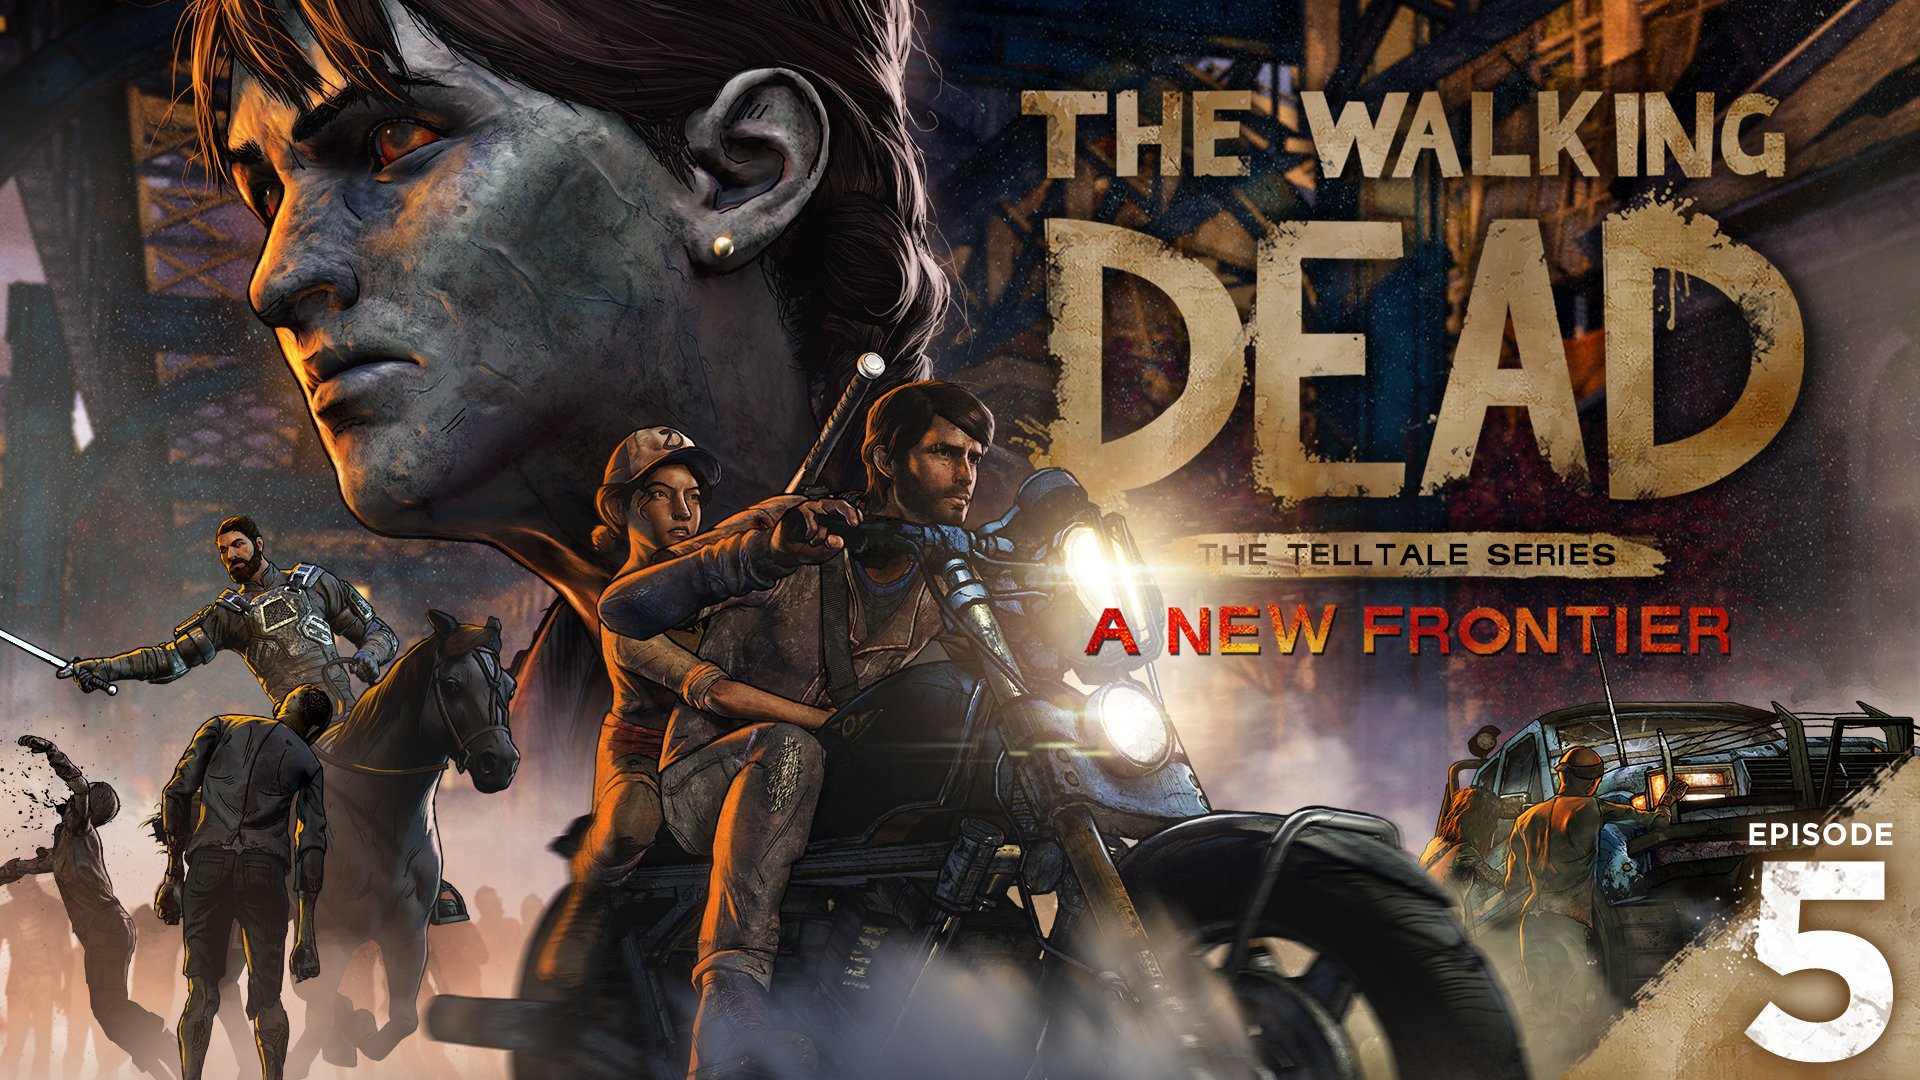 chequea-trailer-final-temporada-the-walking-dead-new-frontier-frikigamers.com